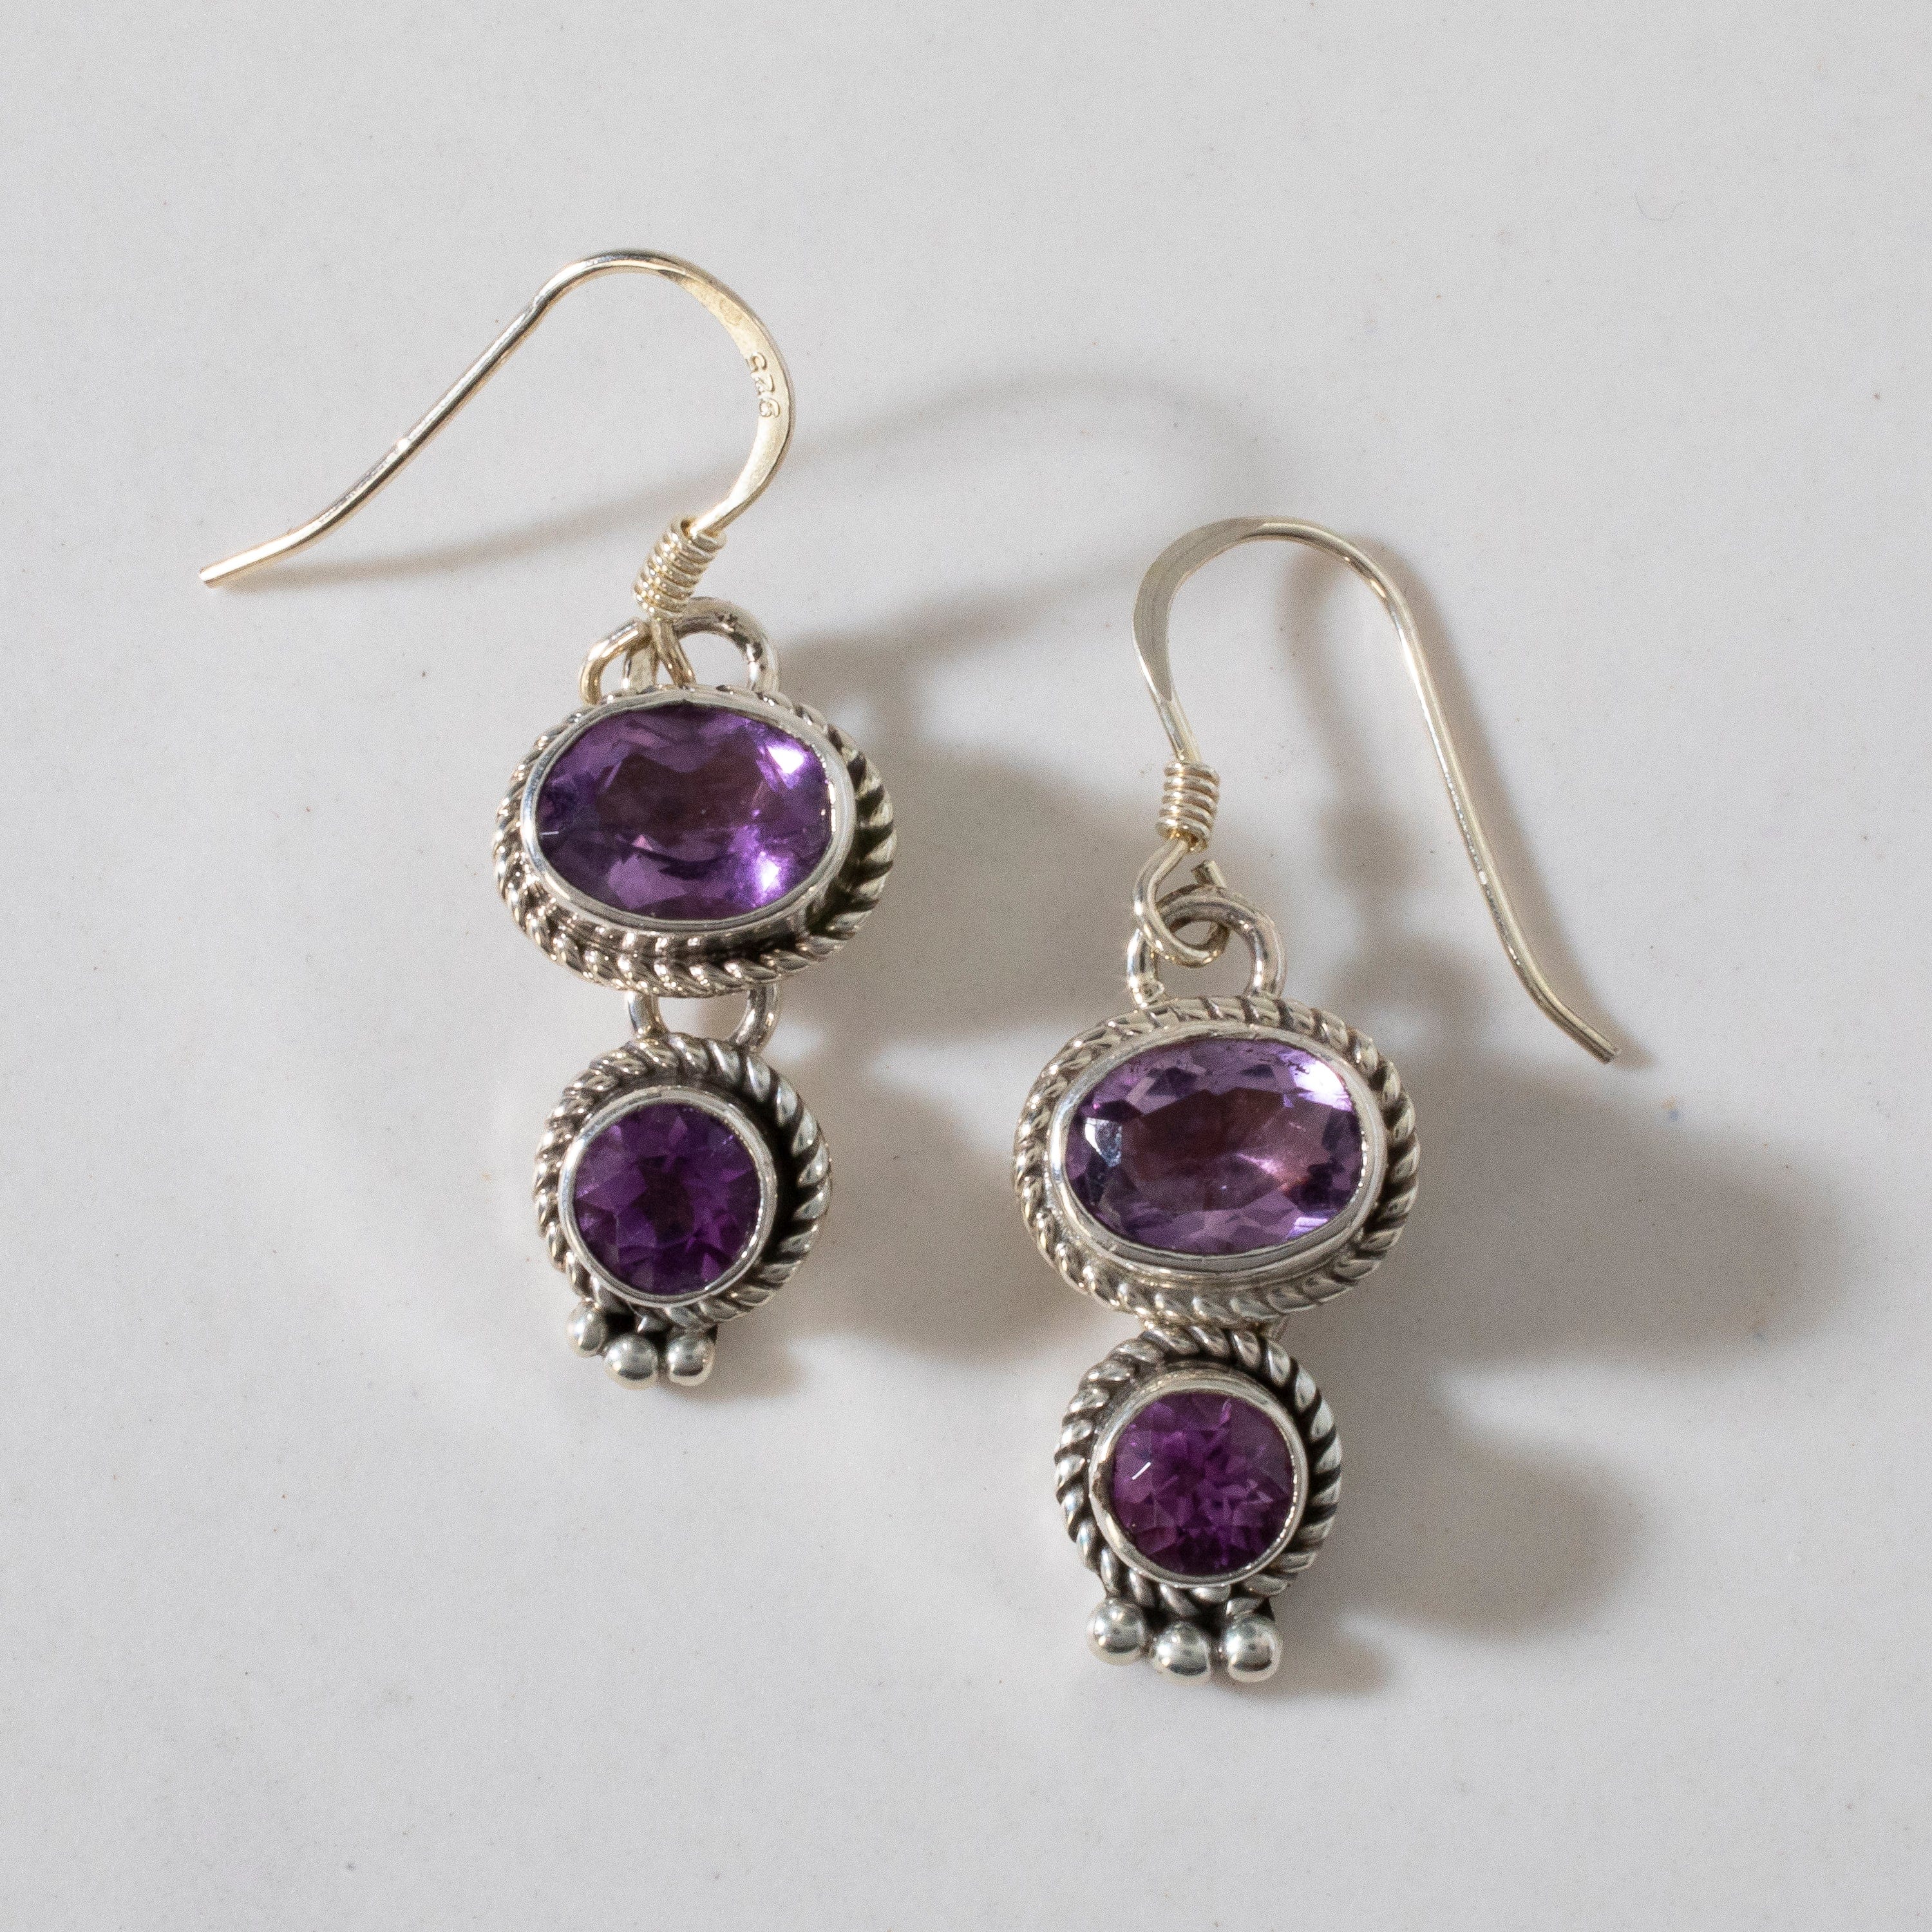 Kalifano Native American Jewelry Amethyst Navajo USA Native American Made 925 Sterling Silver Earrings with French Hook NAE400.033